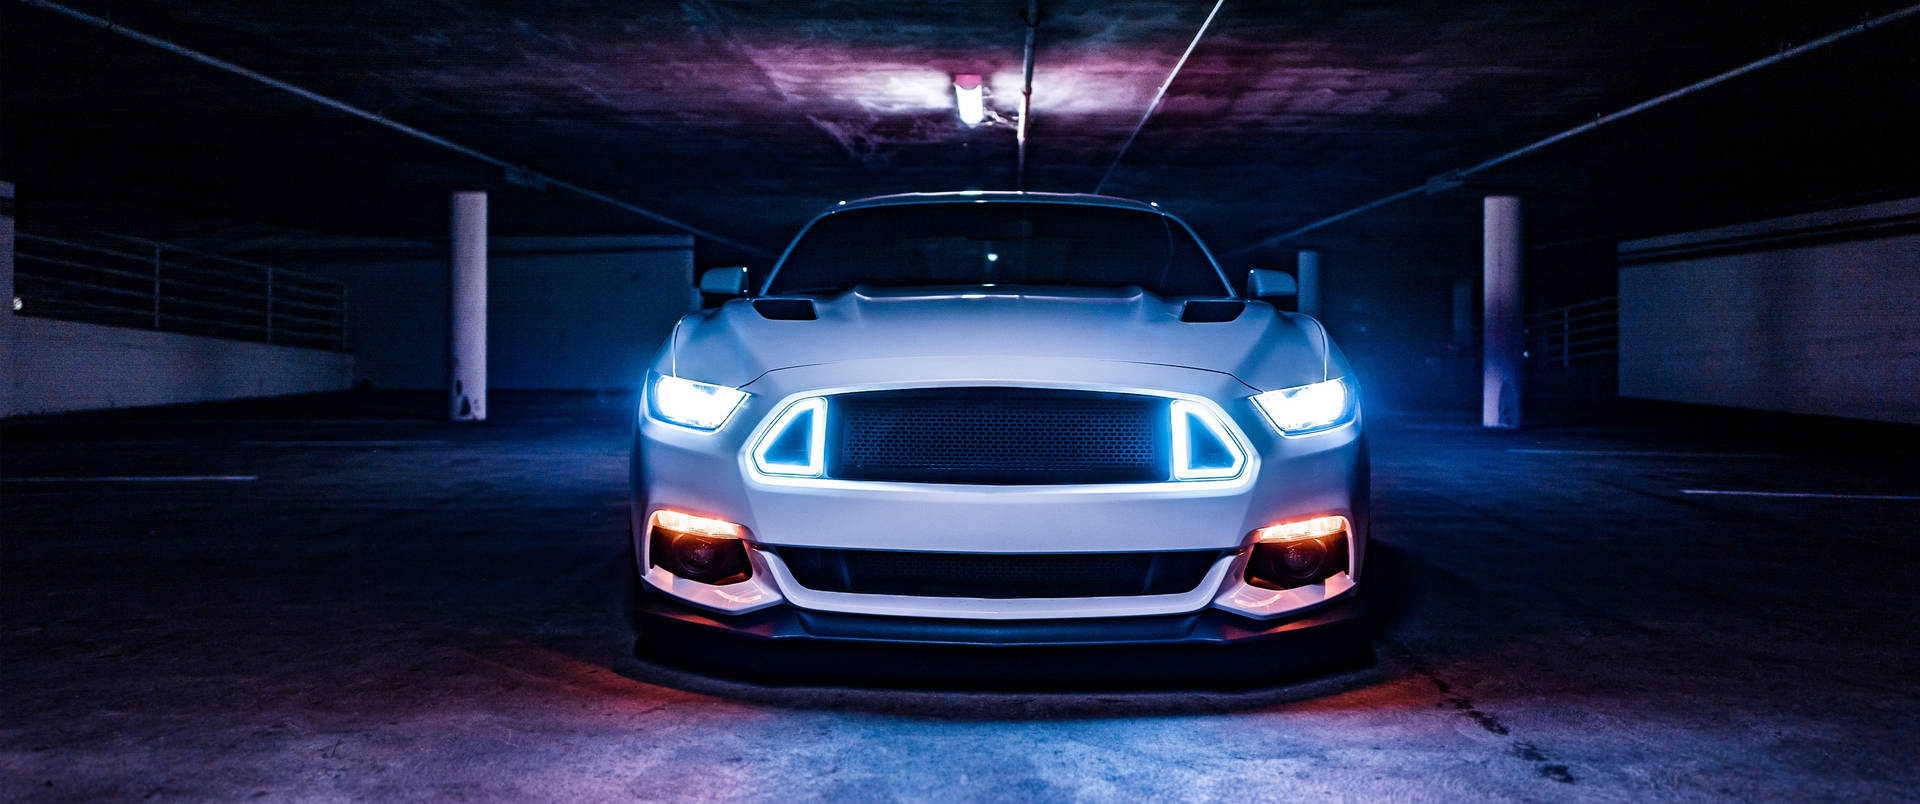 3440x1440 Car Ford Mustang